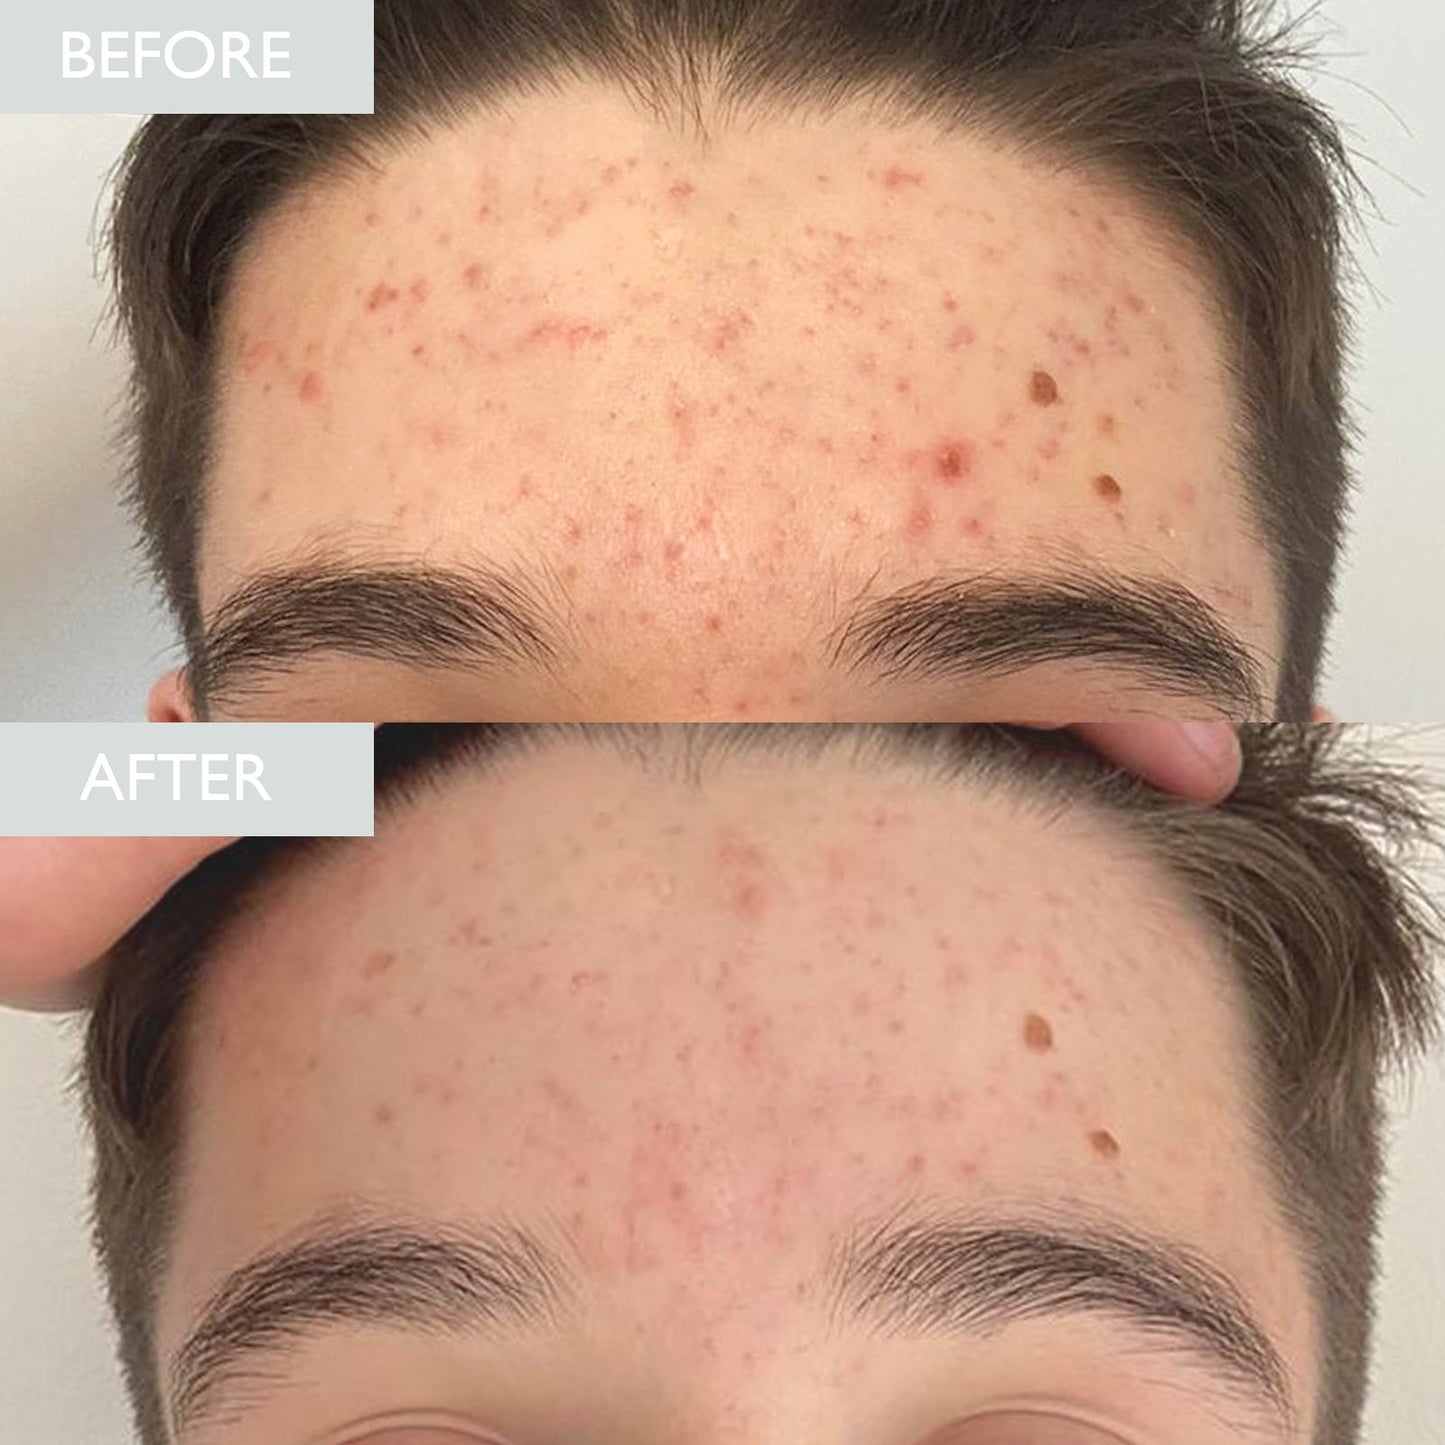 Before and after shown with improvement is spots and breakouts from acne, after using Skinician's oily skincare samples